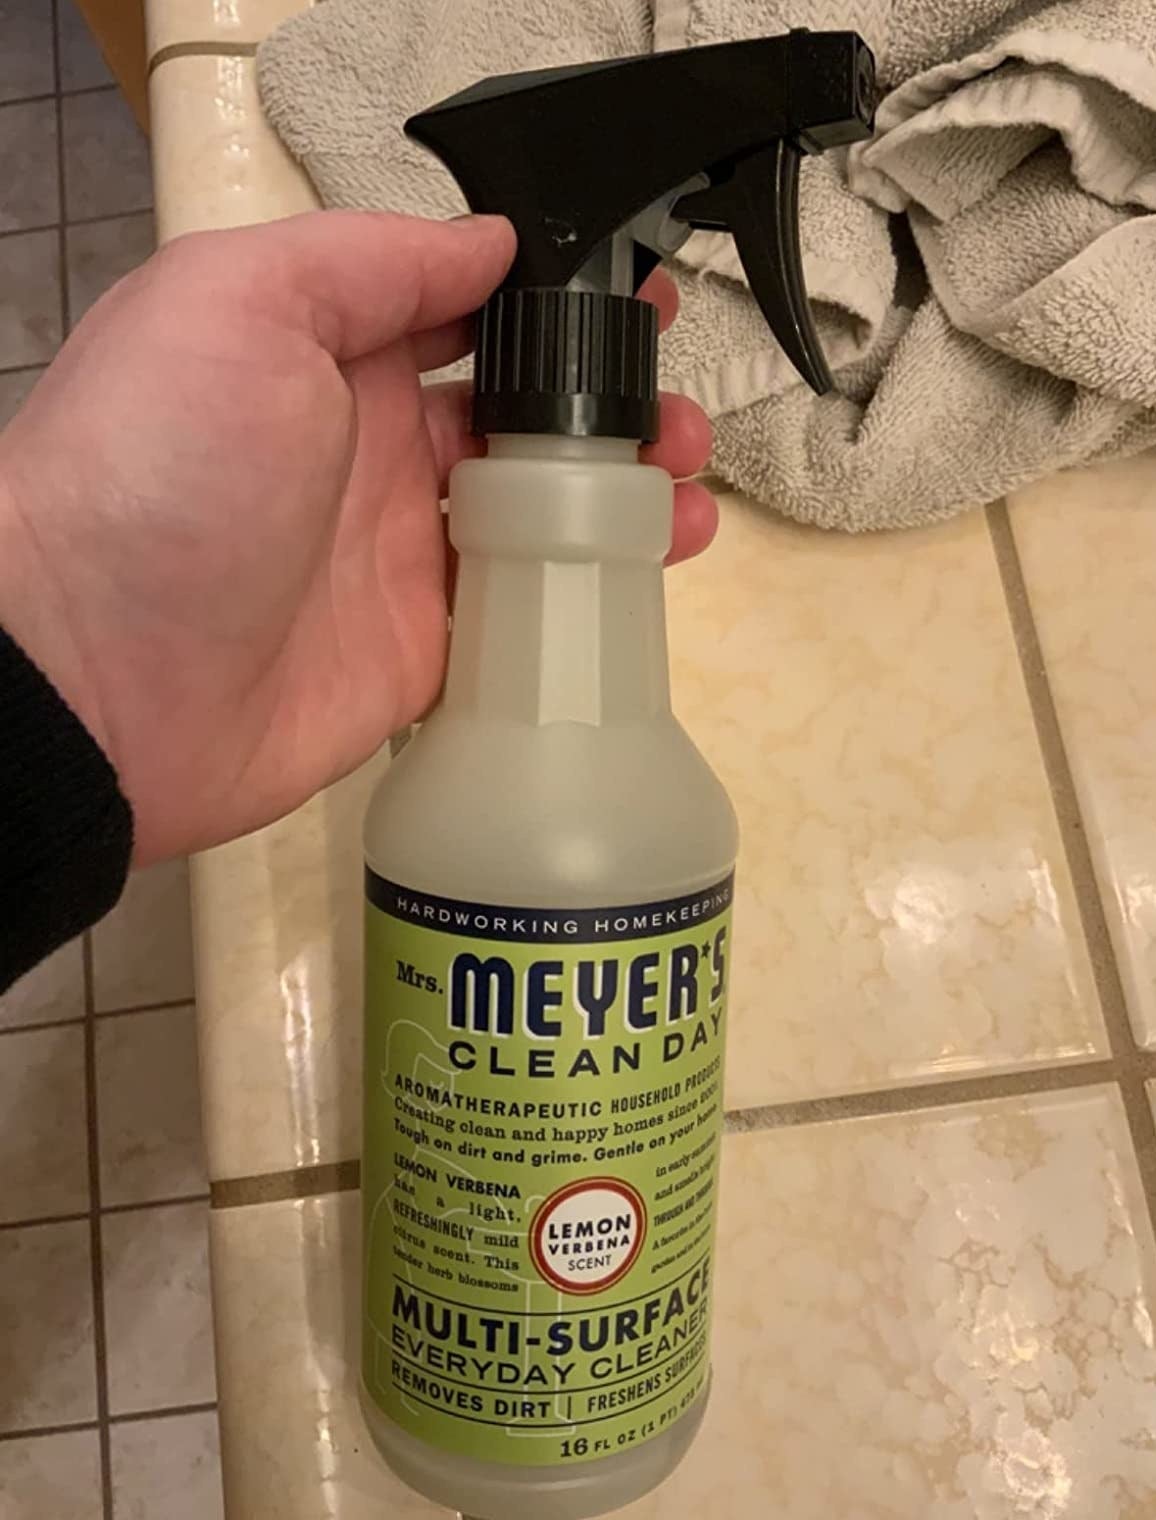 Image of reviewer holding the spray bottle